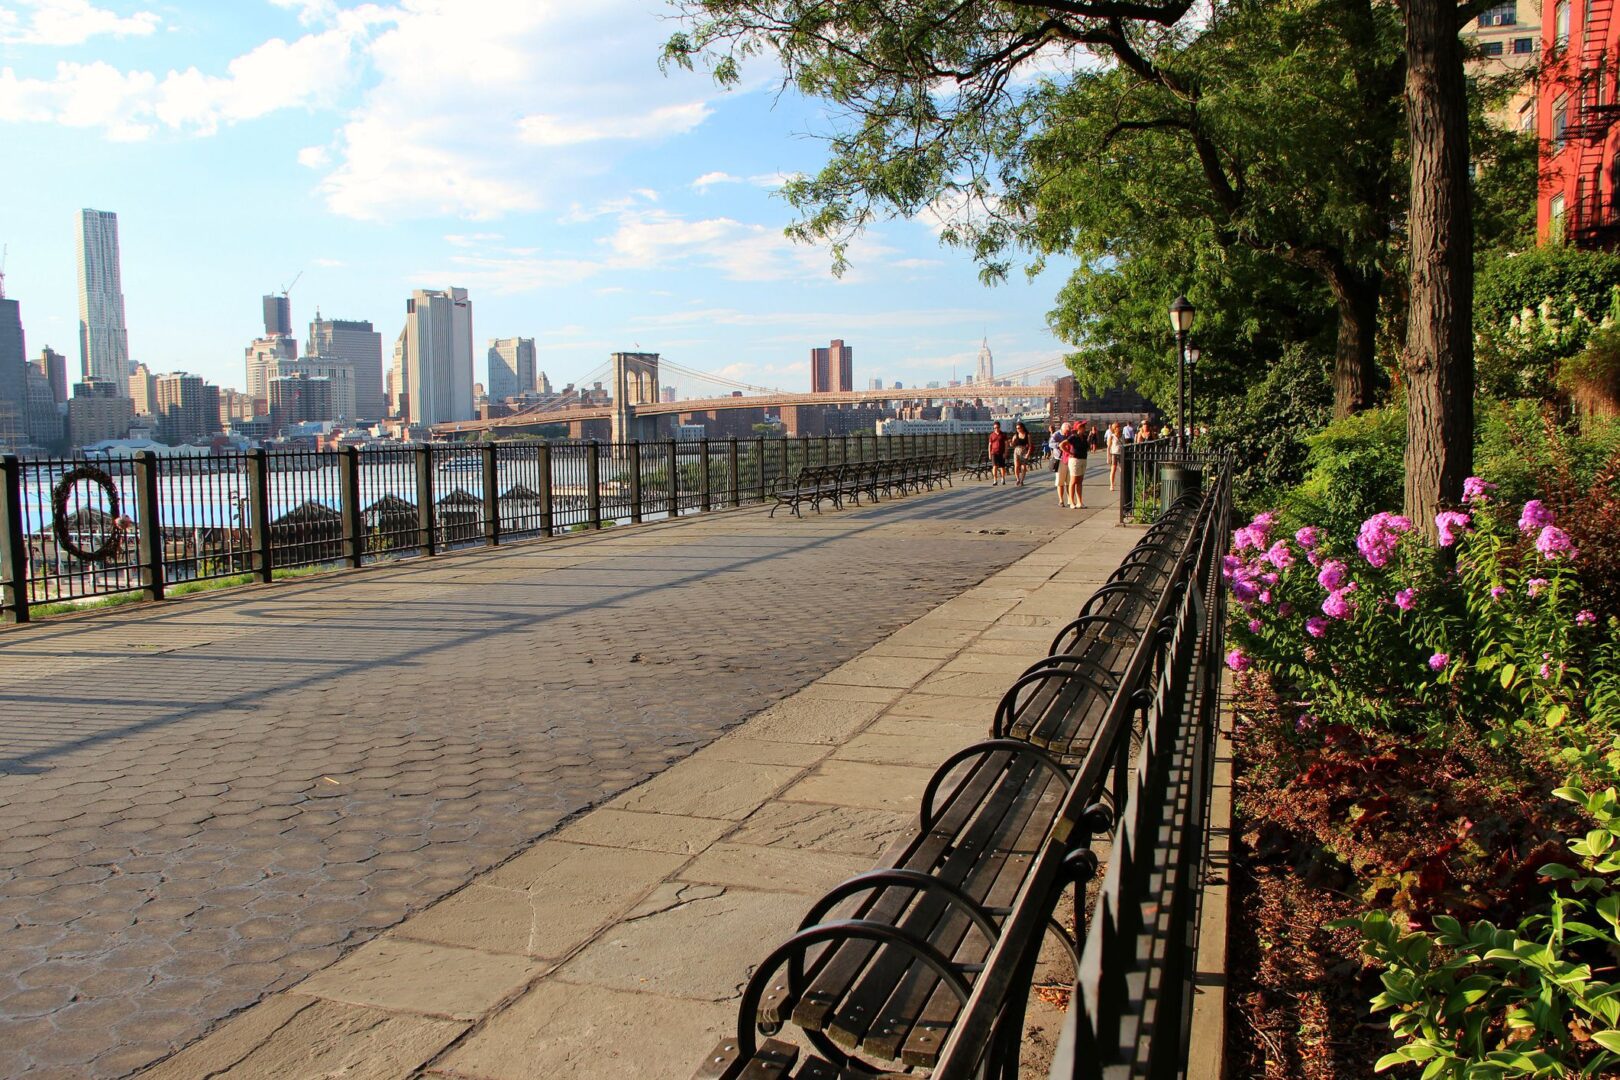 A scenic view of a waterfront promenade with benches overlooking a city skyline and bridge.